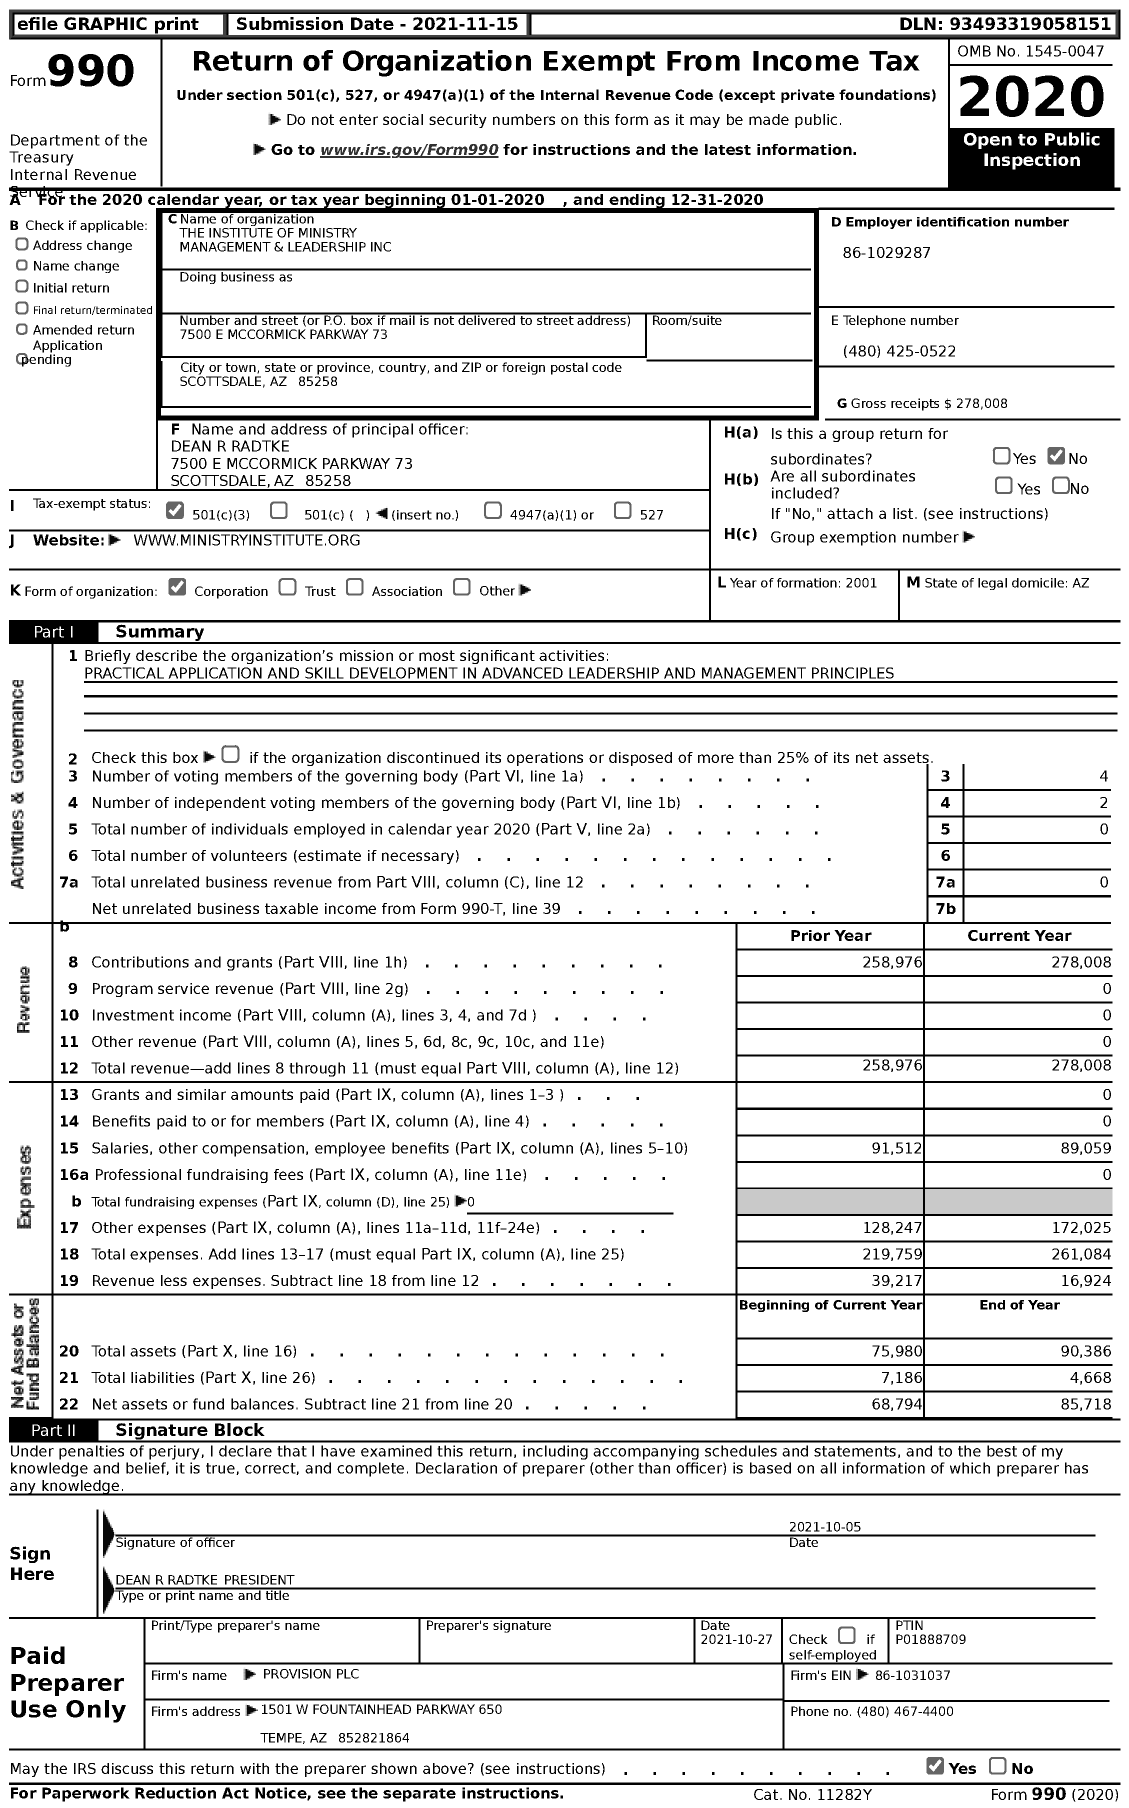 Image of first page of 2020 Form 990 for The Institute of Ministry Management and Leadership